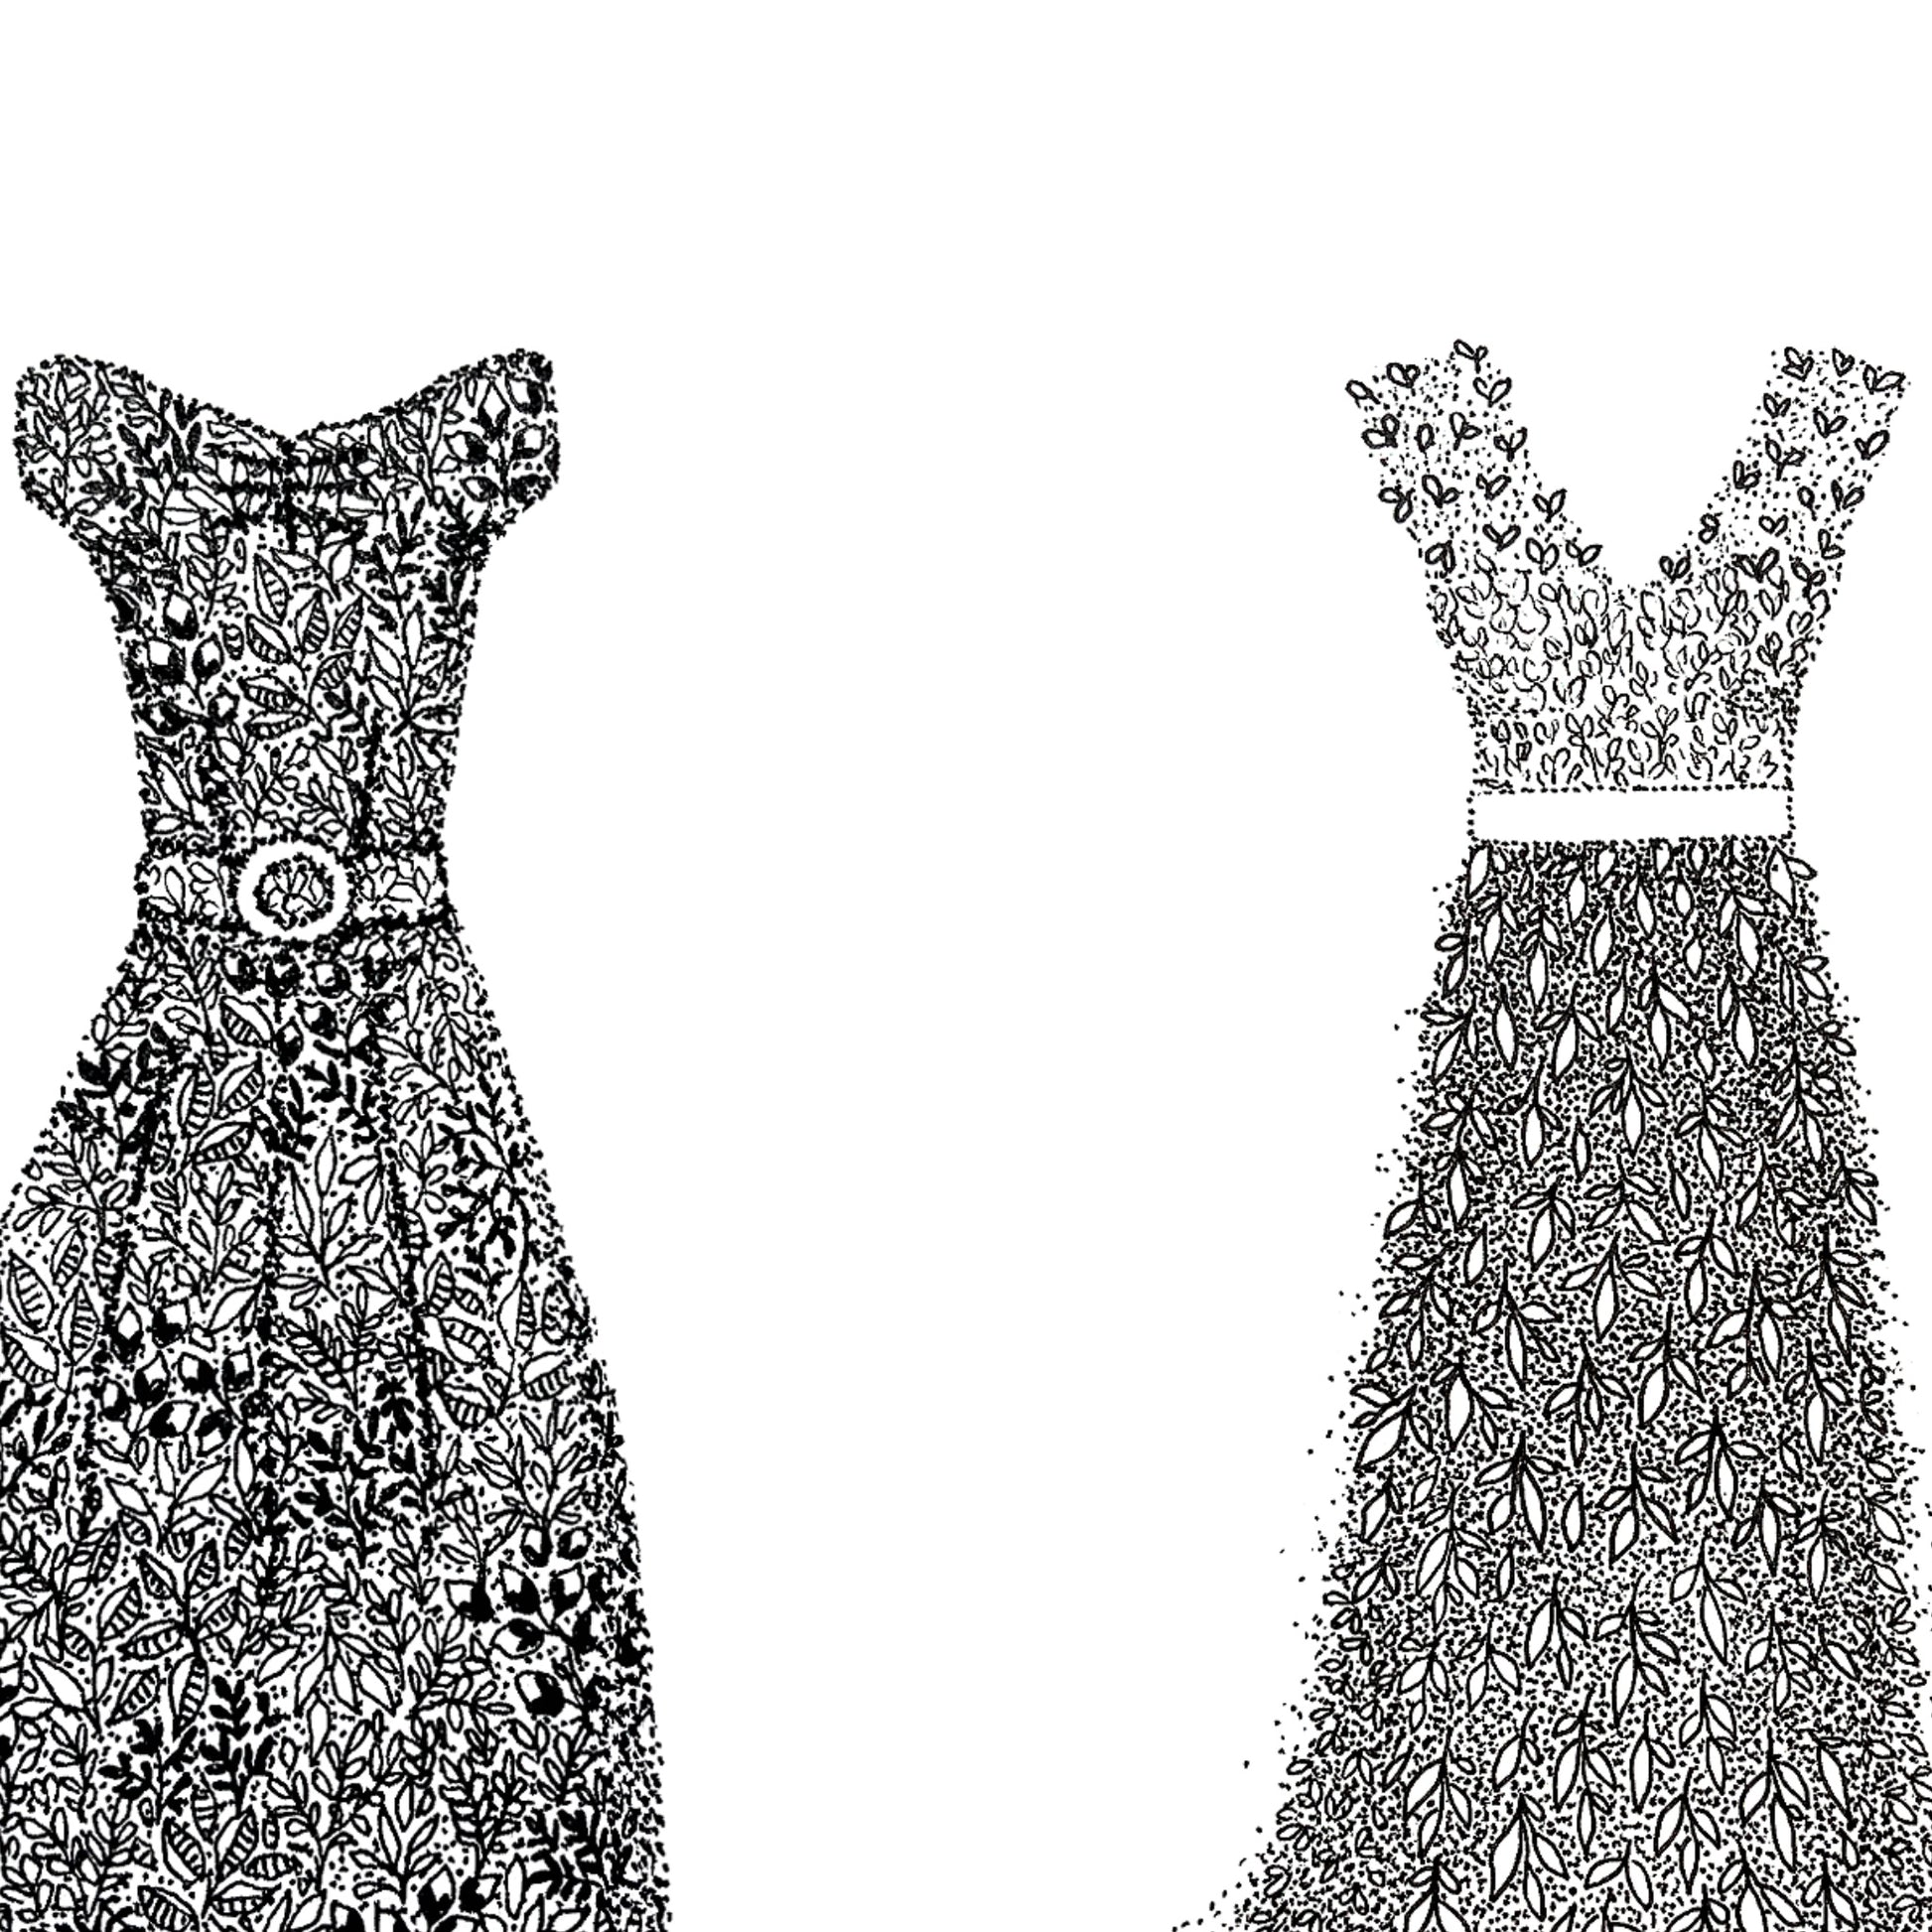 Image shows MRS & MRS card illustration. both titles are portrayed by dresses, the one on the left being a short sleeve dress with belt in the middle and more structure and the one to the right being a floral summer-y vibe dress more flowy. Both dresses are hand drawn using floral drawings. Image entirely black and white. Image is shown in a close up view to display the detail in the drawings. 